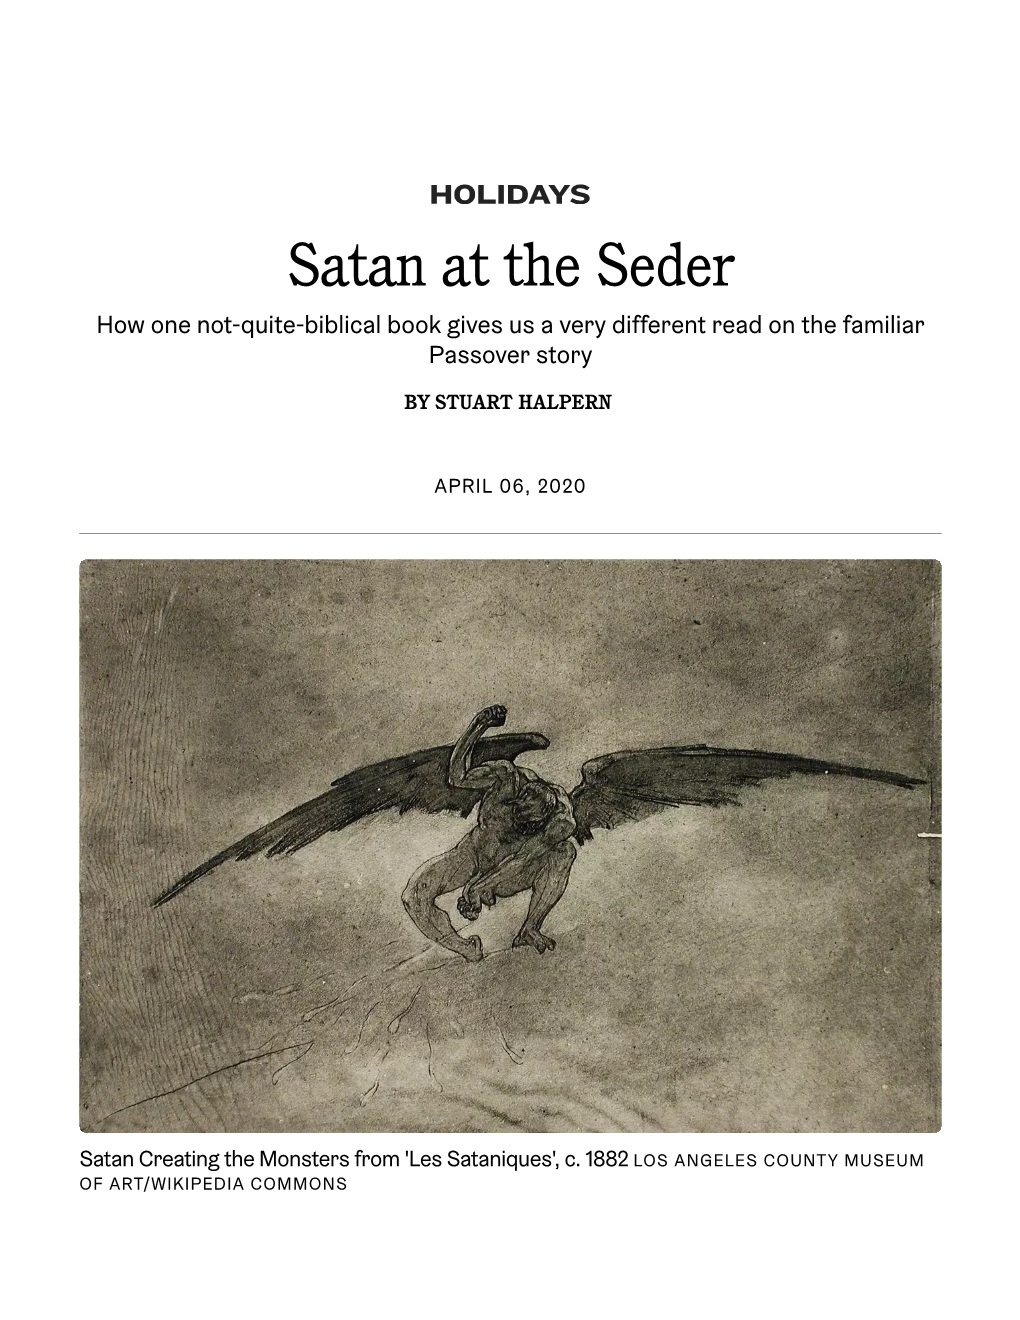 Satan at the Seder How One Not-Quite-Biblical Book Gives Us a Very Di�Erent Read on the Familiar Passover Story